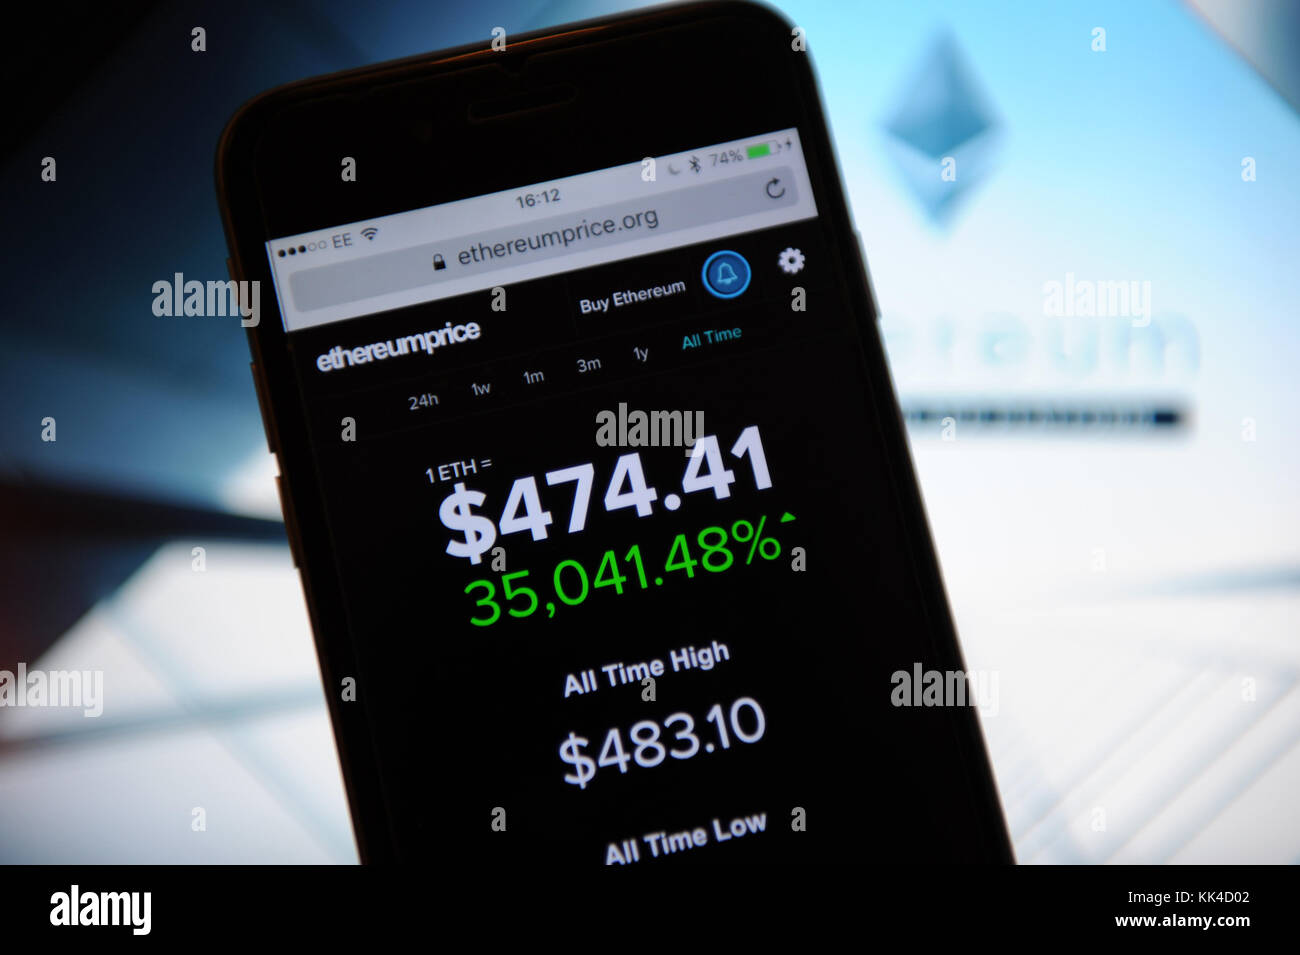 Ethereumprice.org website seen on a phone and  the ethereum website is seen behind on a computer screen Stock Photo